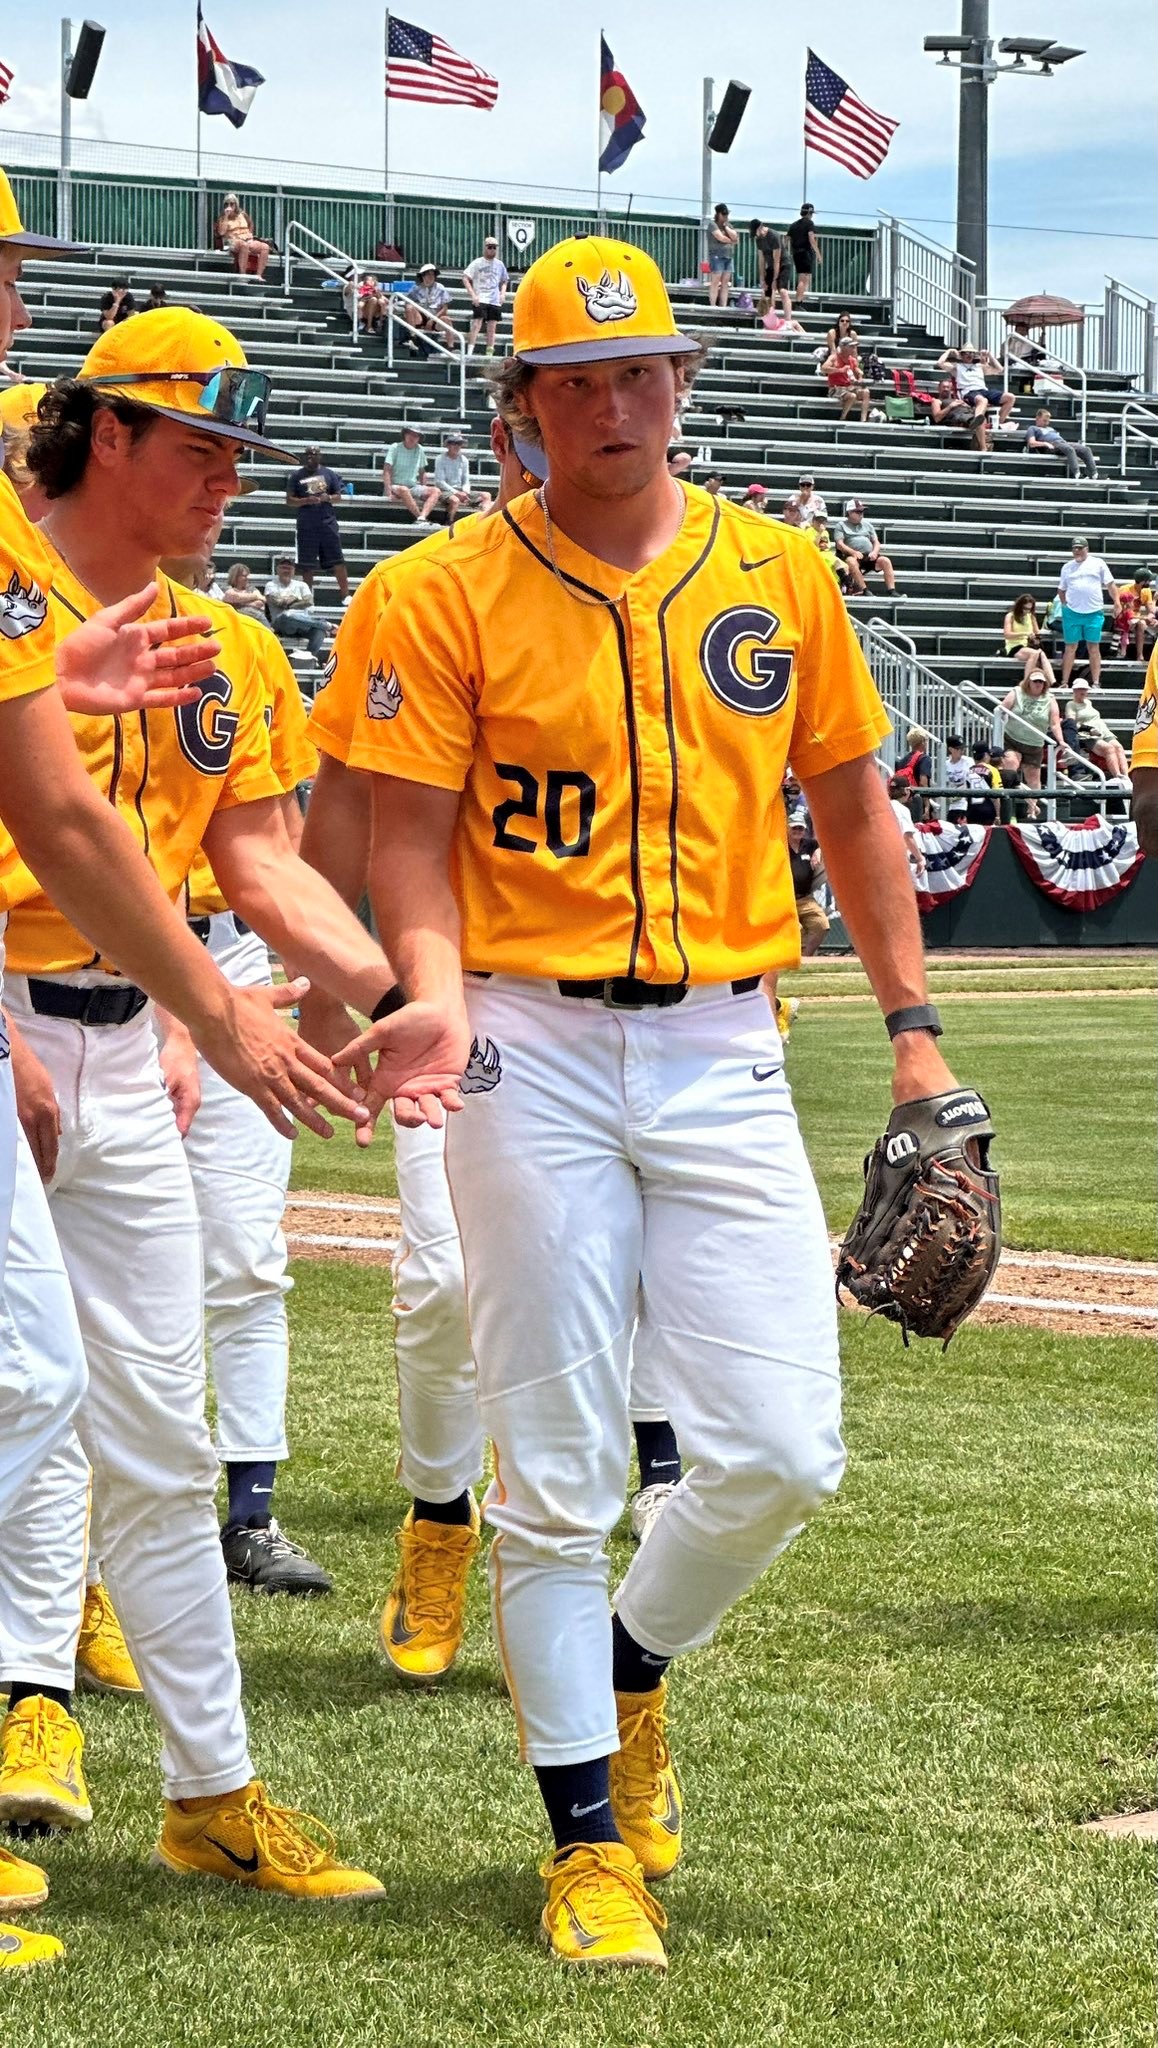 Gaston College's Landon Carr, shown here during the 2023 NJCAA World Series, made his first career pitching start on Sunday.